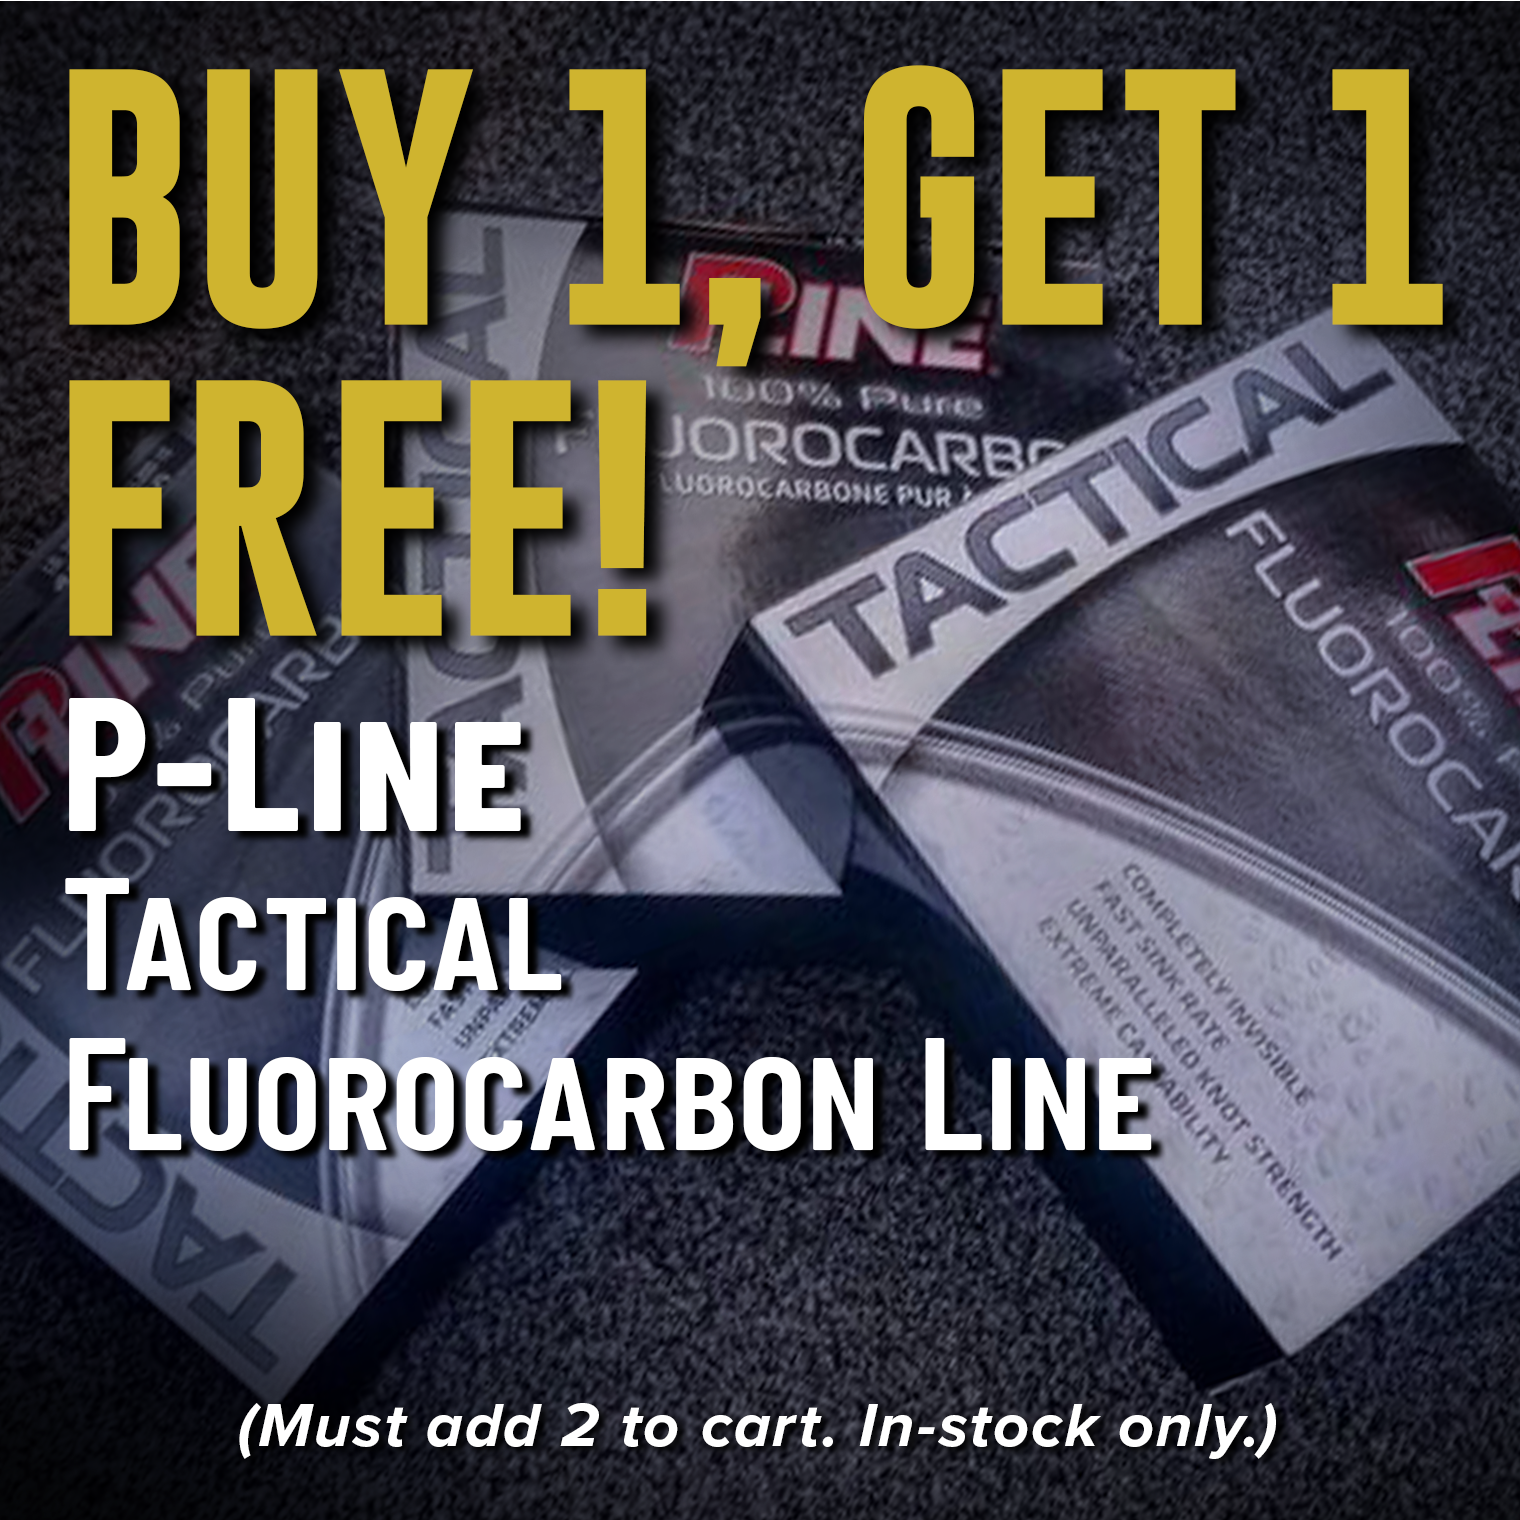 Buy 1, Get 1 Free! P-Line Tactical FLuorocarbon Line (Must add 2 to cart. In-stock only.)